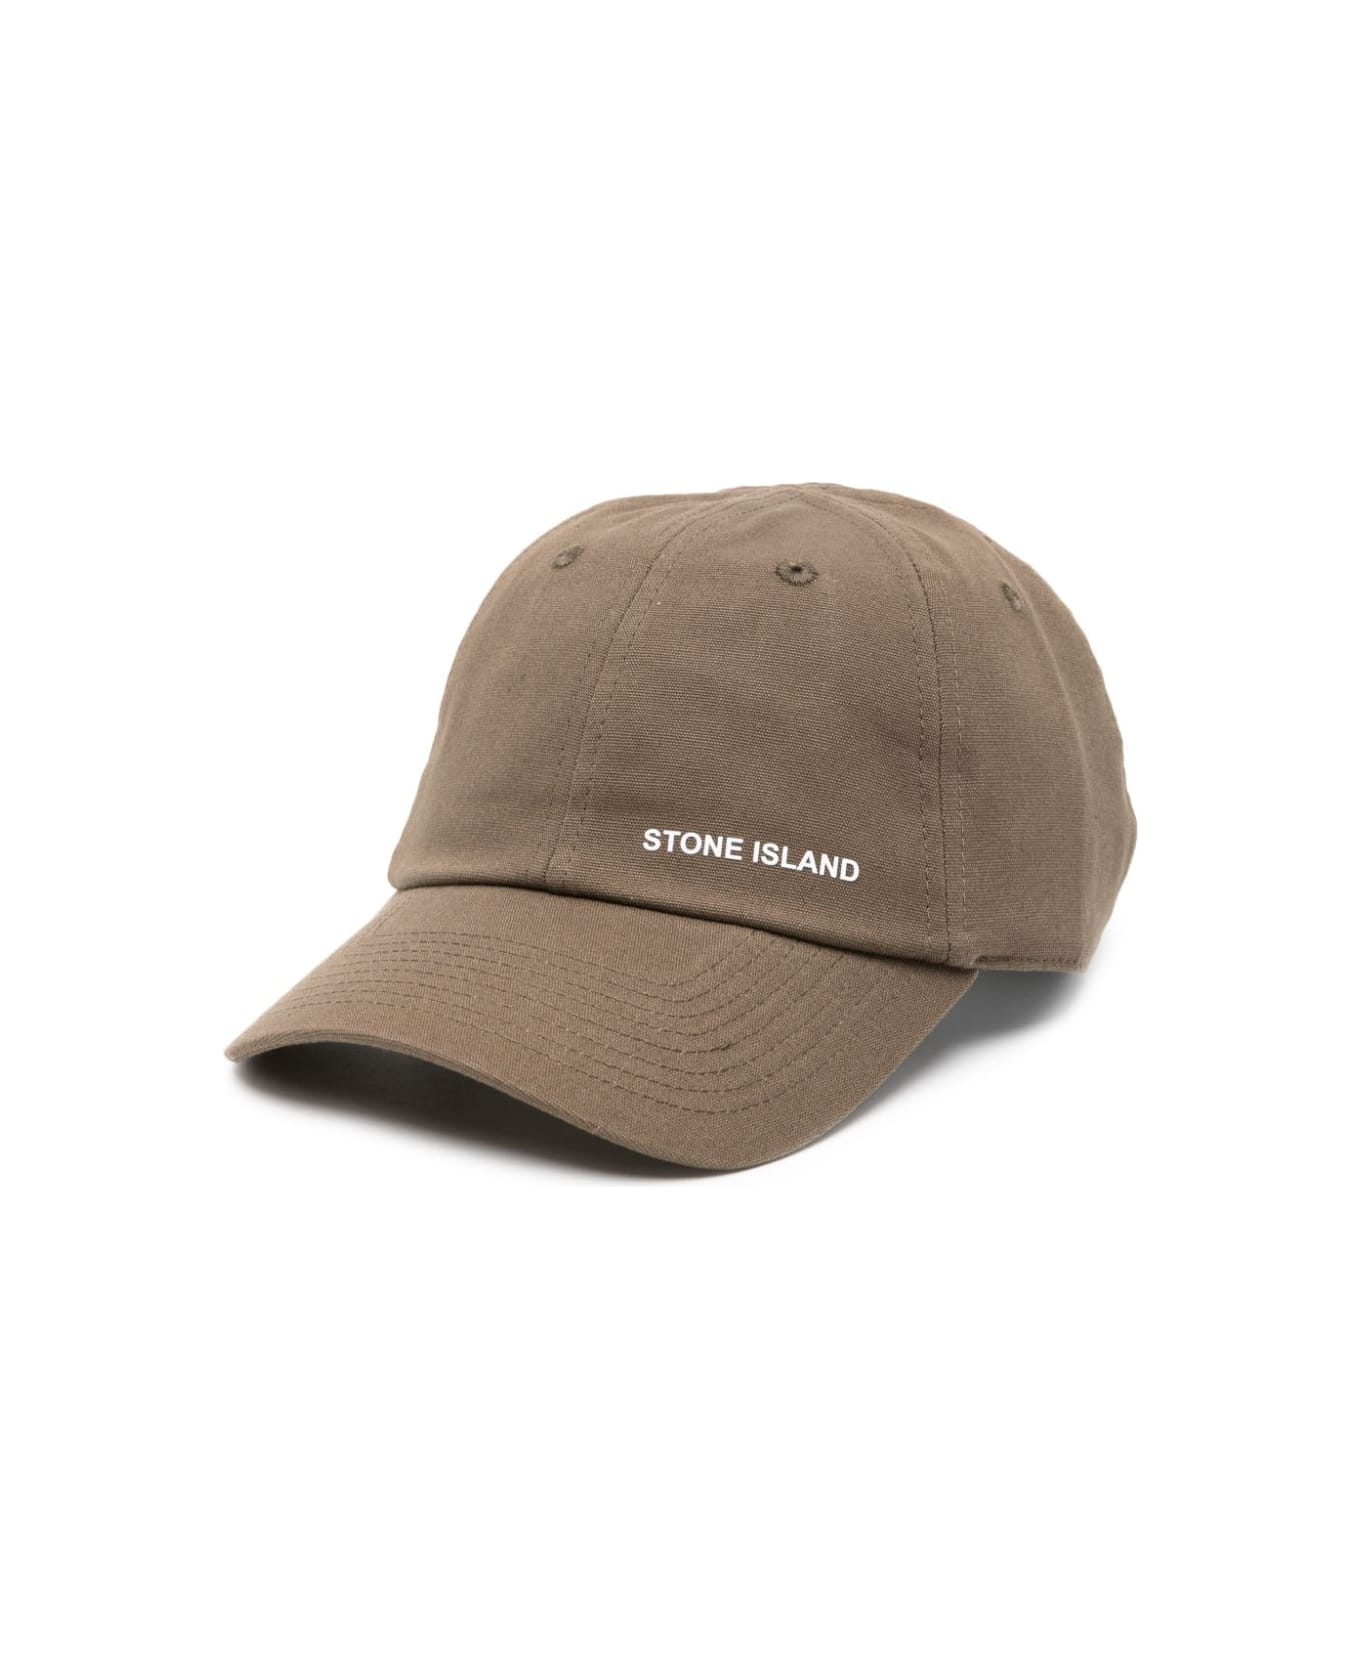 Stone Island Military Green Baseball Claudette Hat With Embossed Print - Brown